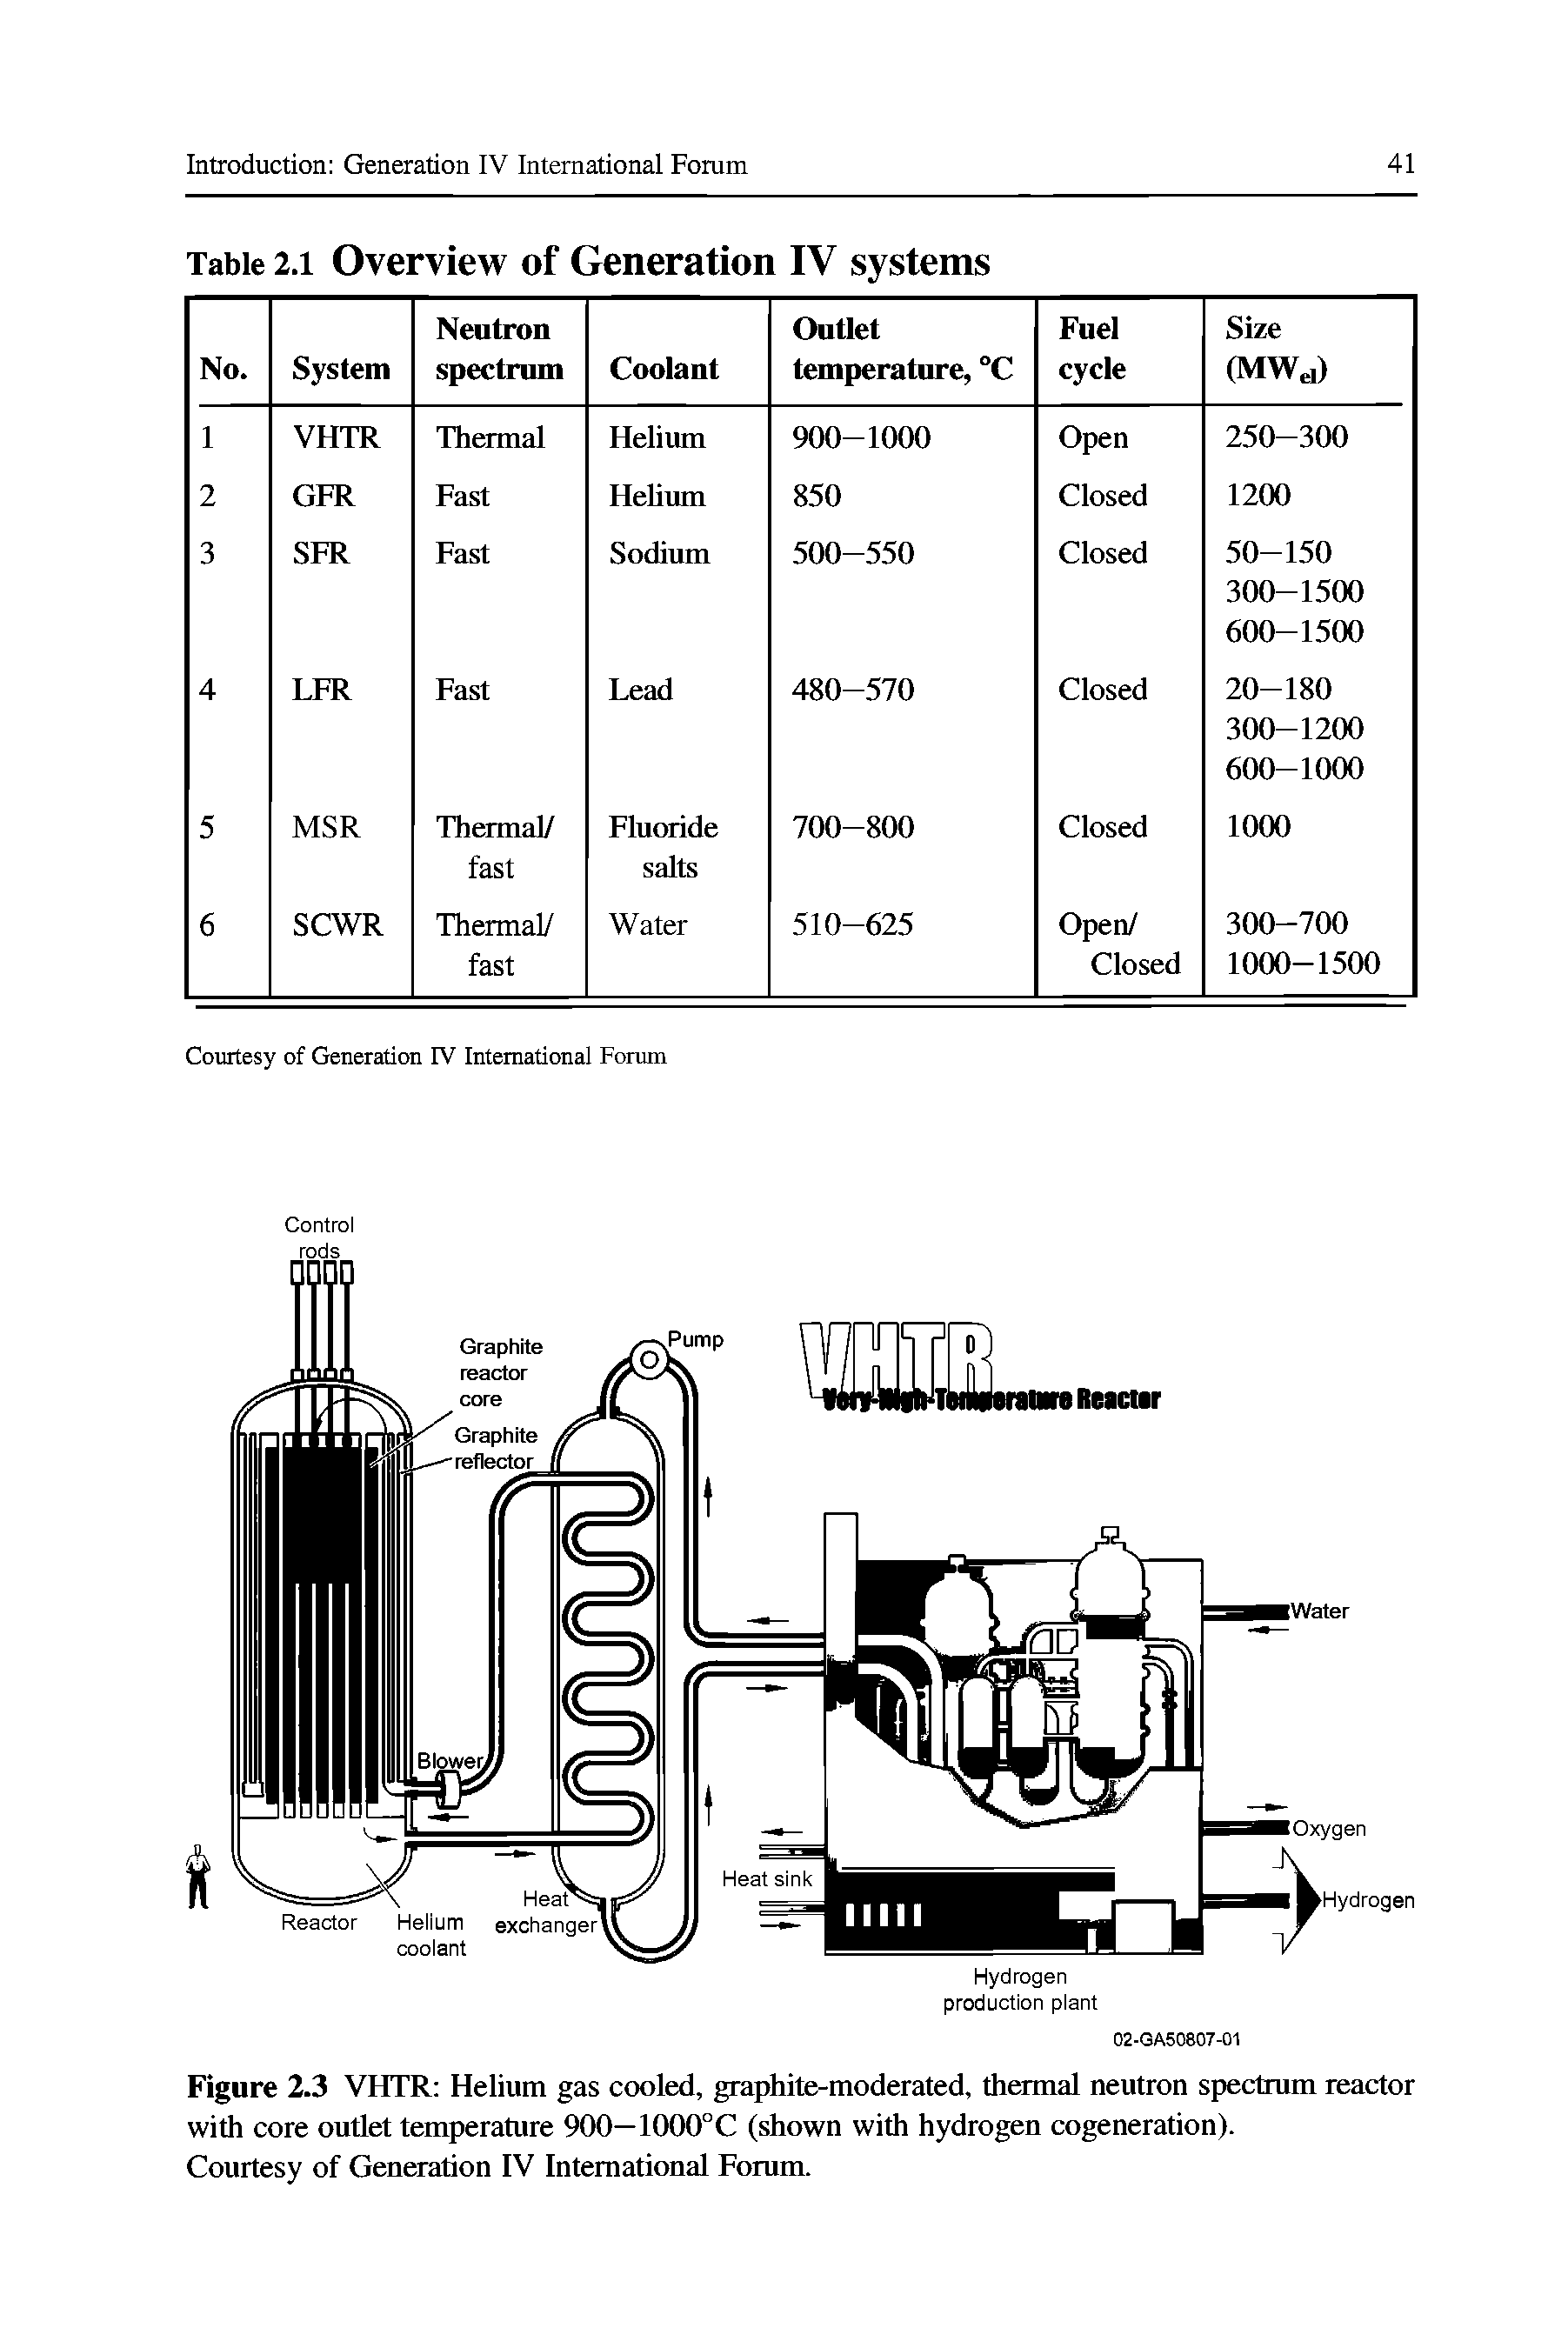 Figure 2.3 VHTR Helium gas cooled, graphite-moderated, thermal neutron spectrum reactor with core outlet temperature 900—1000°C (shown with hydrogen cogeneration).